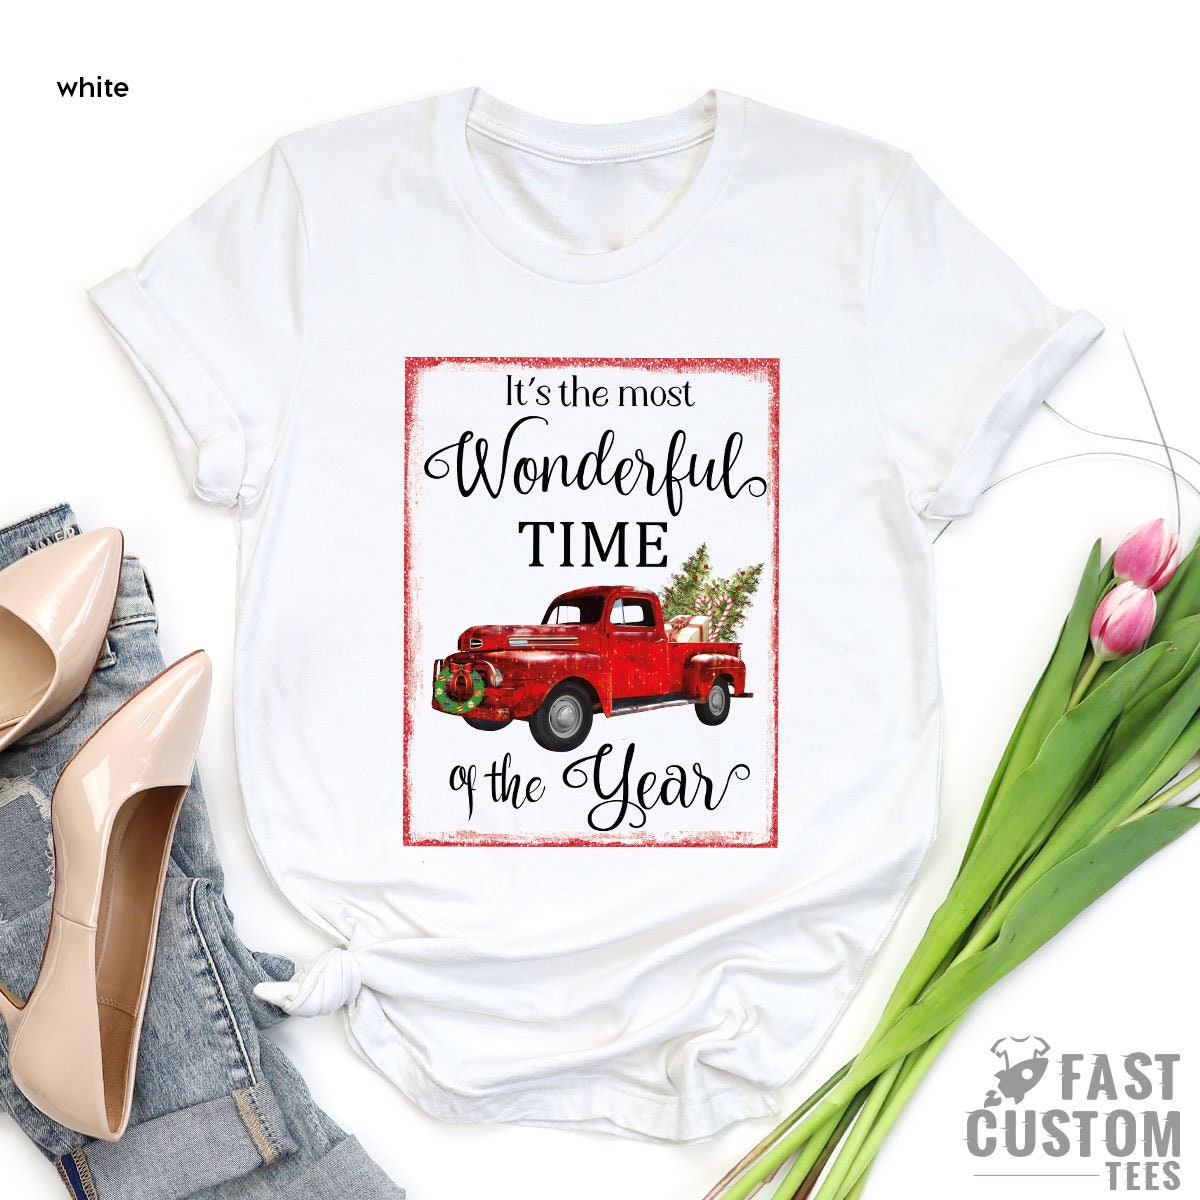 It's The Most Wonderful Time Of The Year Shirt, Christmas Truck shirt, Christmas Tree Shirt, Family Christmas Shirts, Gift For Christmas Tee - Fastdeliverytees.com